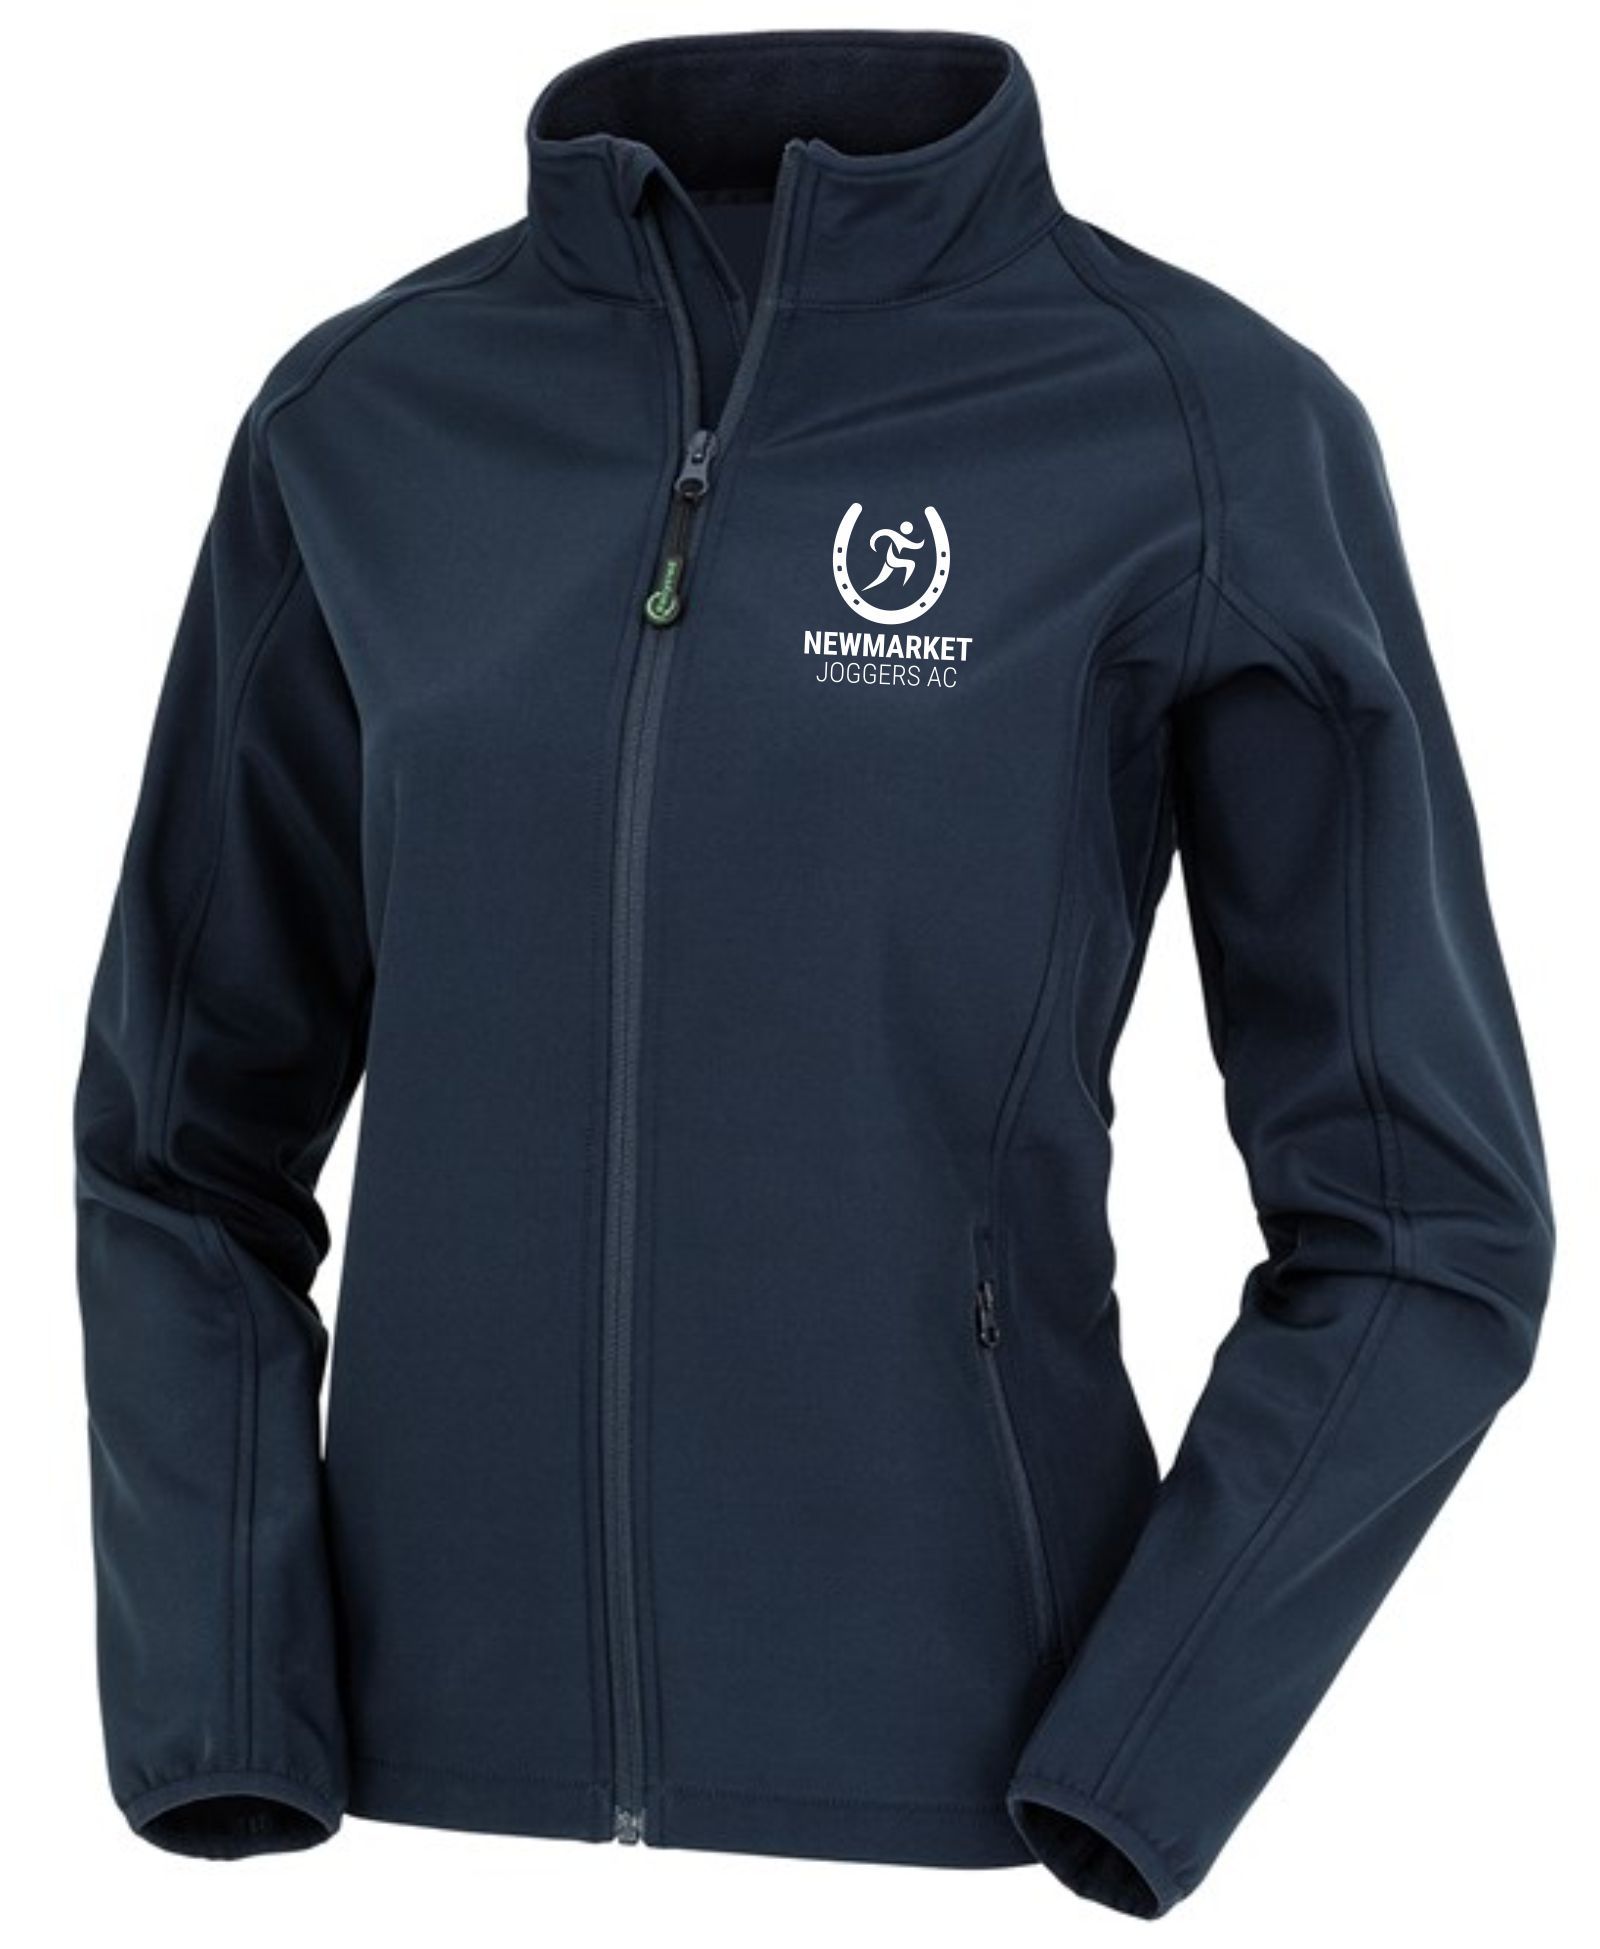 Newmarket Joggers – Outerwear Softshell Jacket (Ladies)